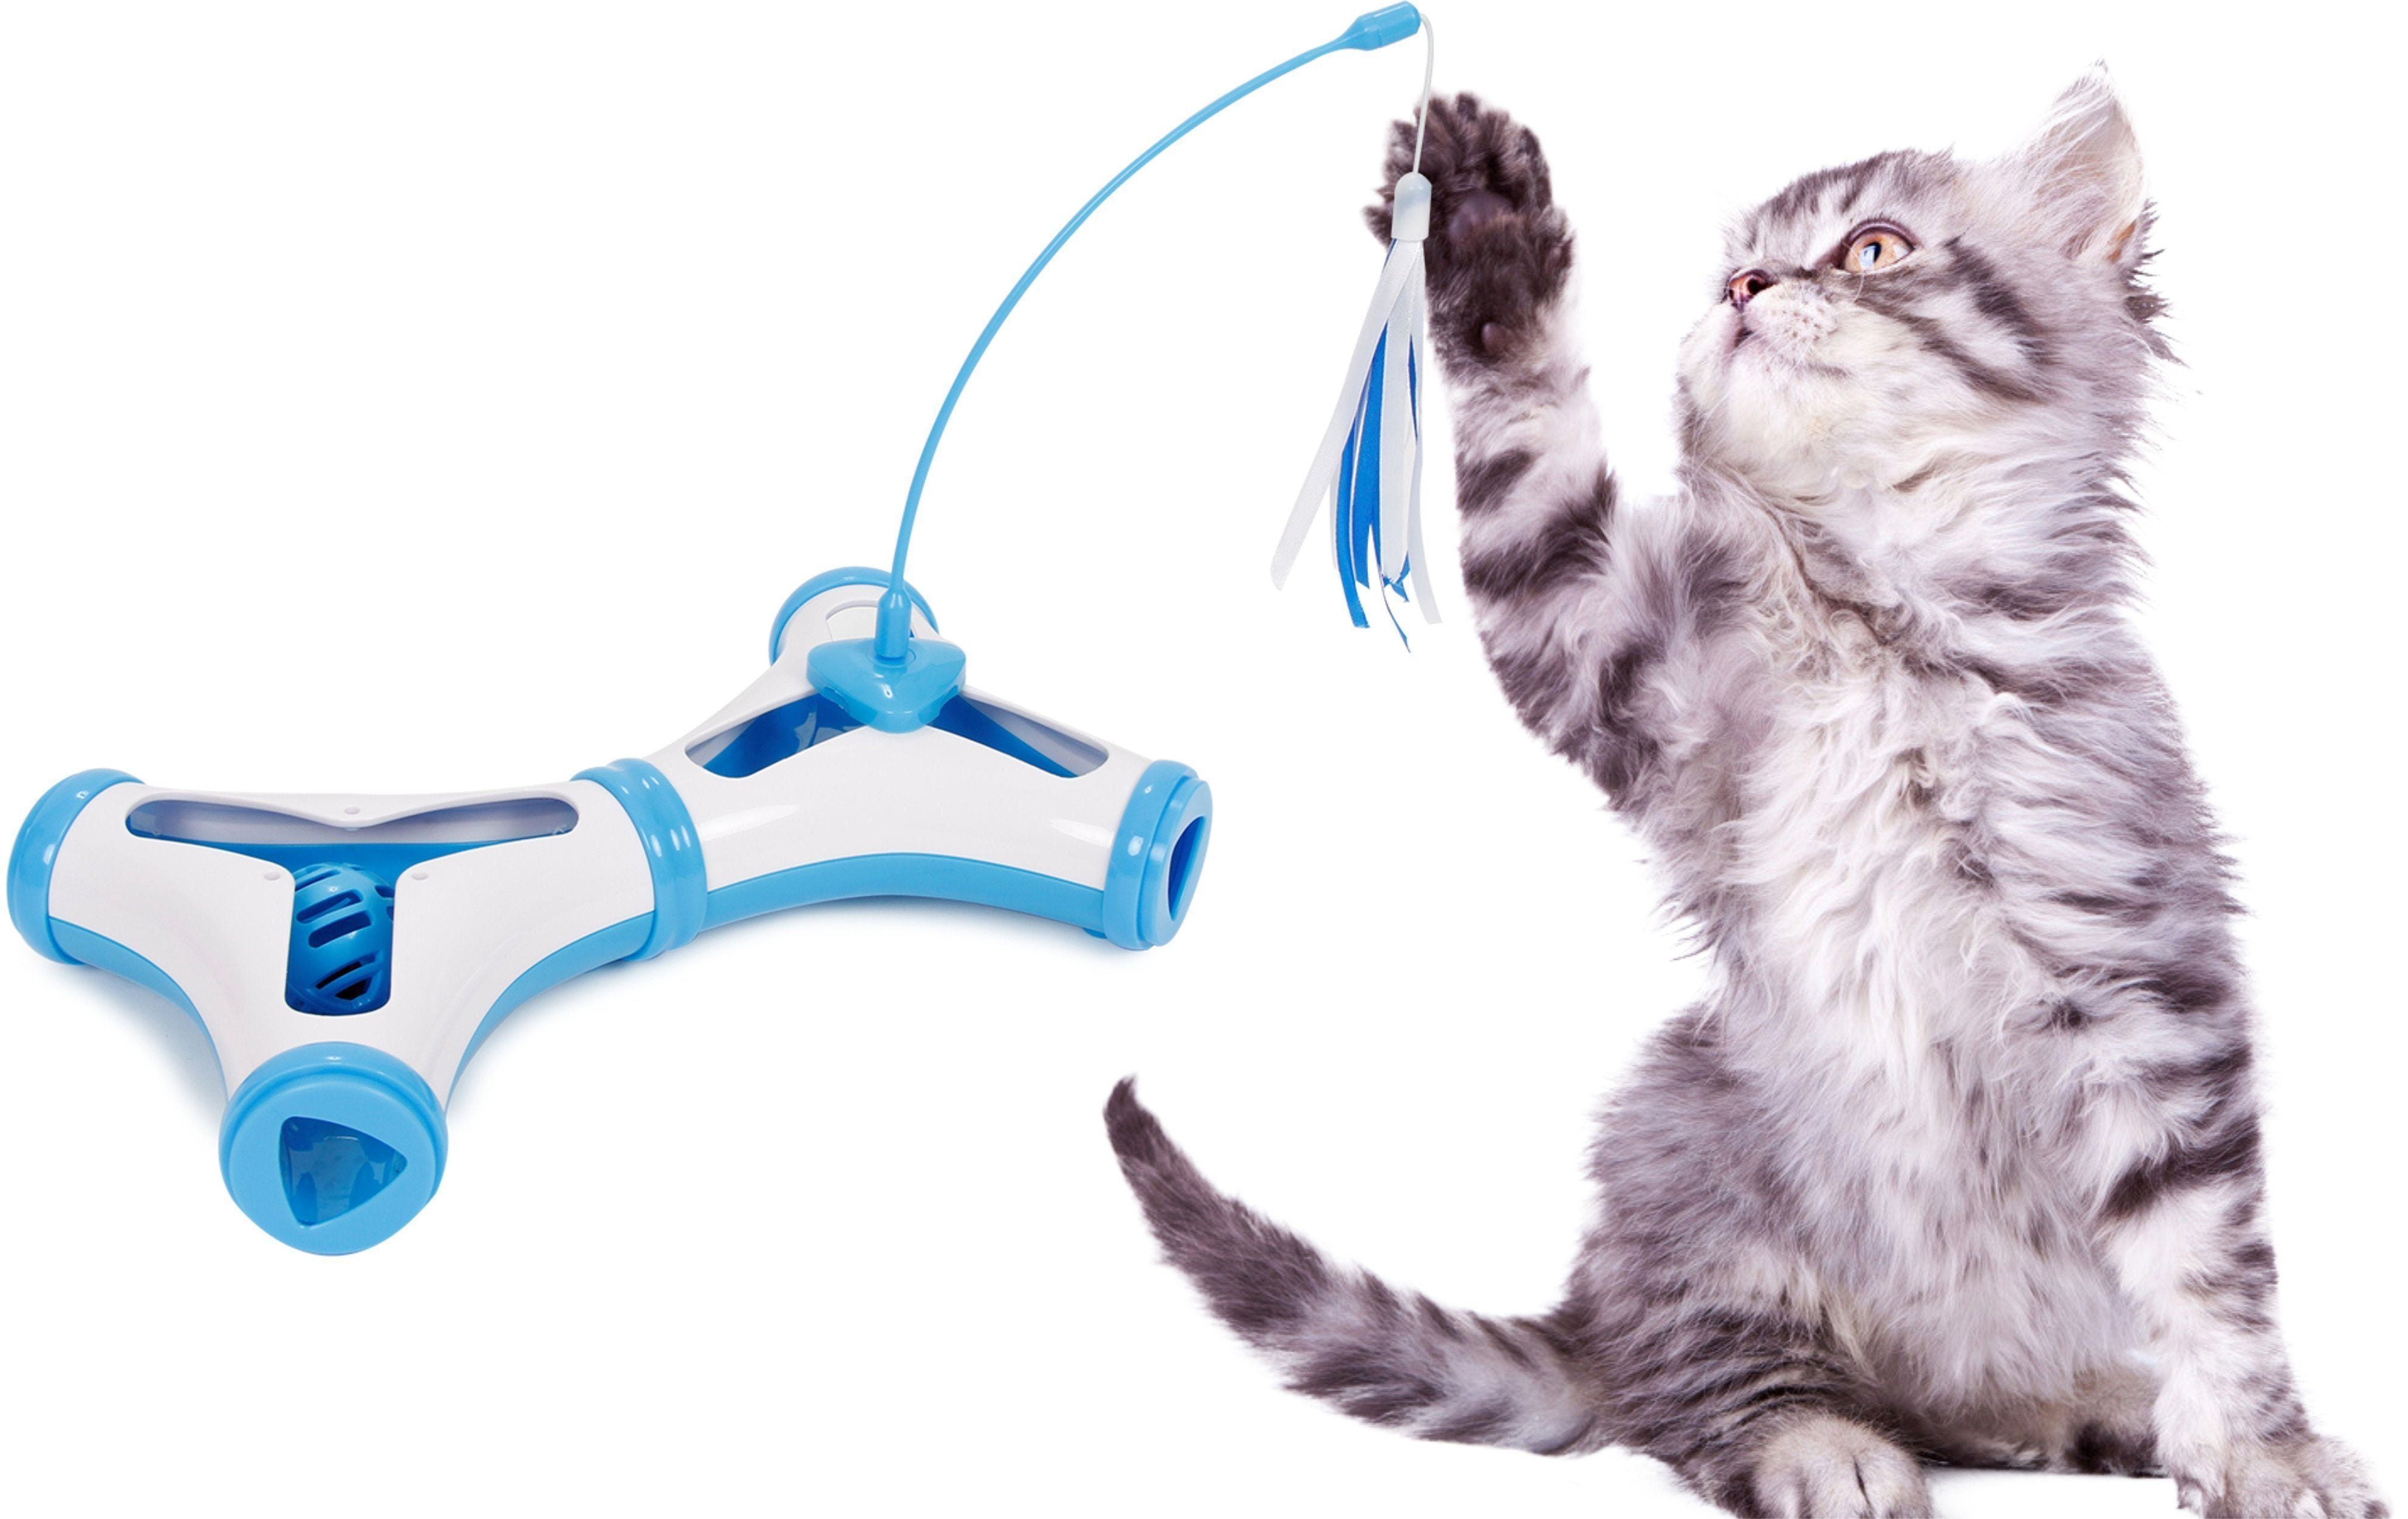 Pet Life 'Sticky-Swipe' Interactive Suction Cup Kitty Cat Toy - Black